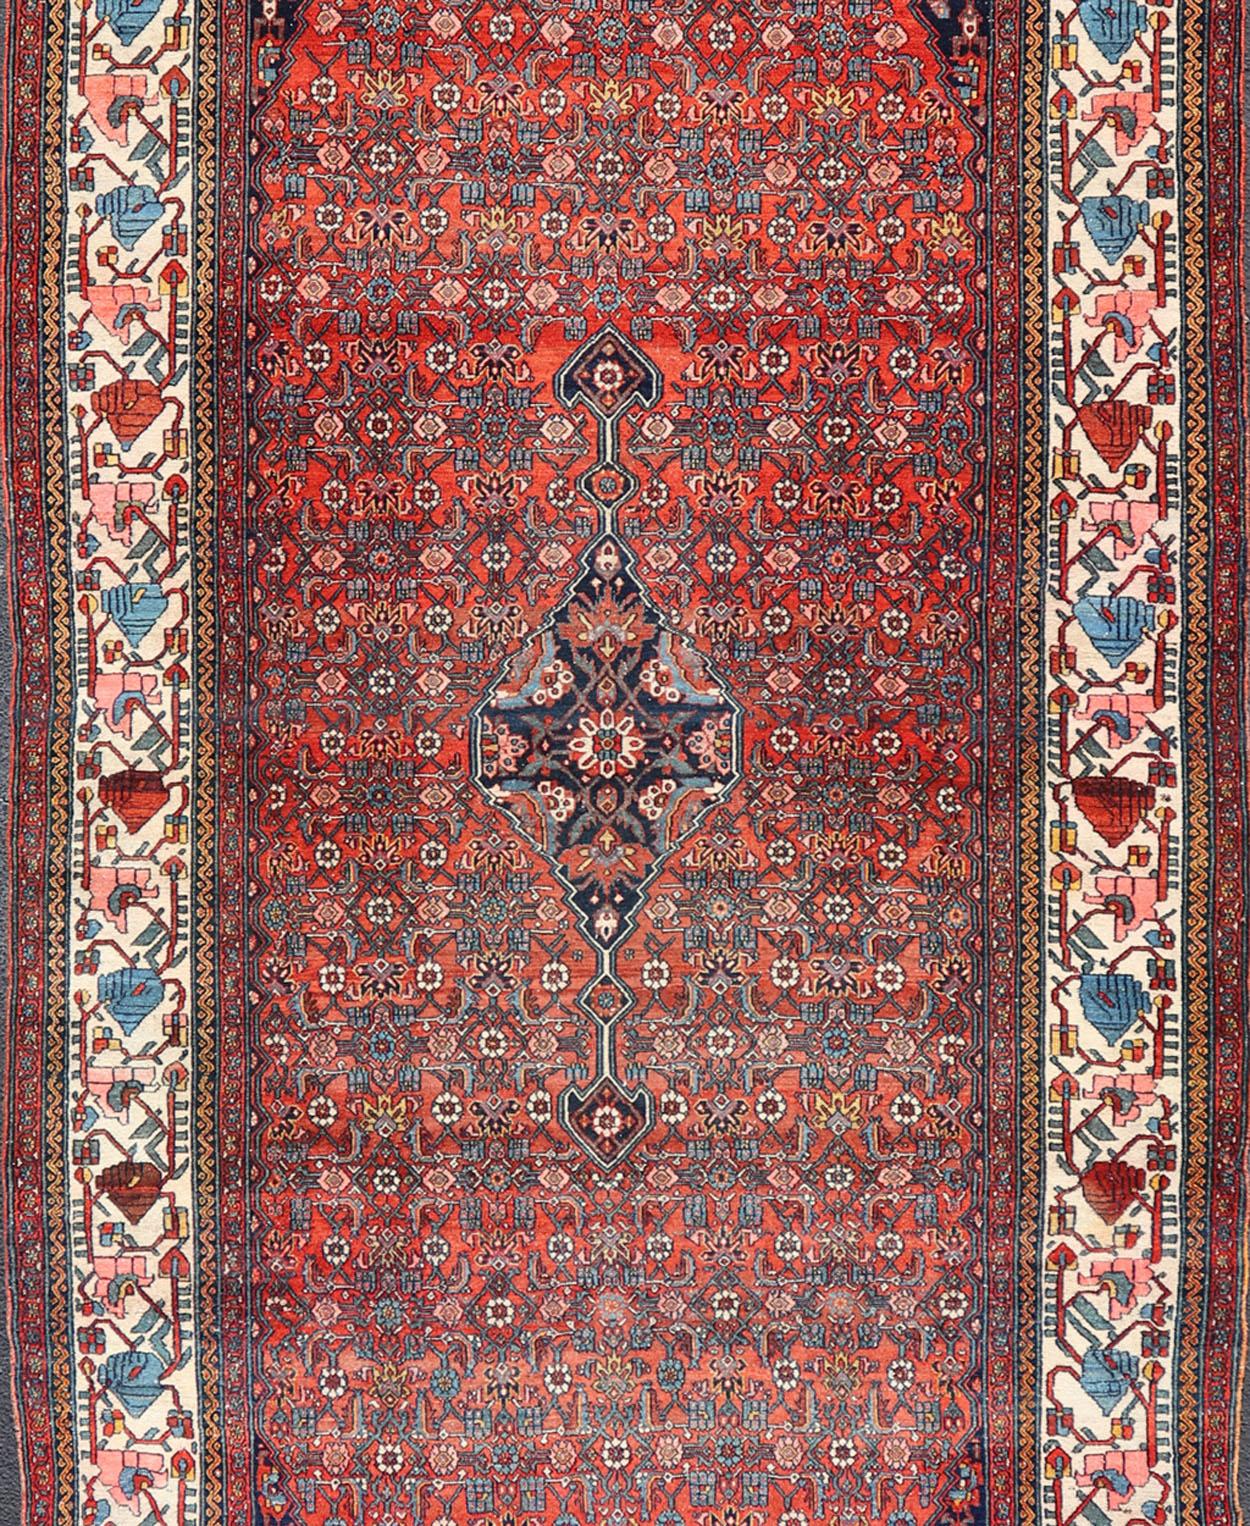 Hand-Knotted Finely Woven Large Antique Persian Gallery Rug in Rich Blue, Brick Red For Sale